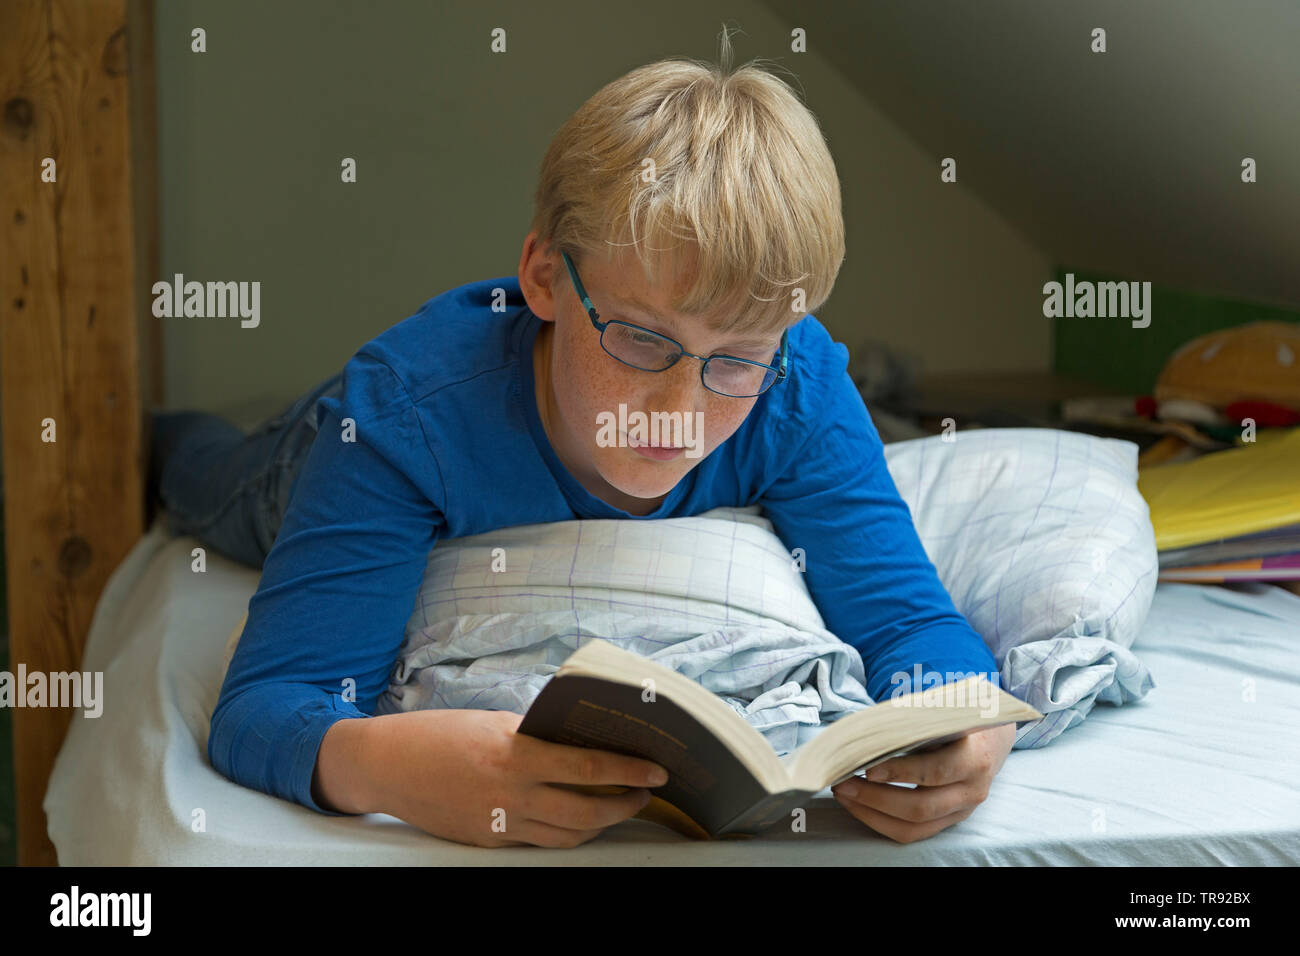 boy lying on his bed reading a book, Germany Stock Photo